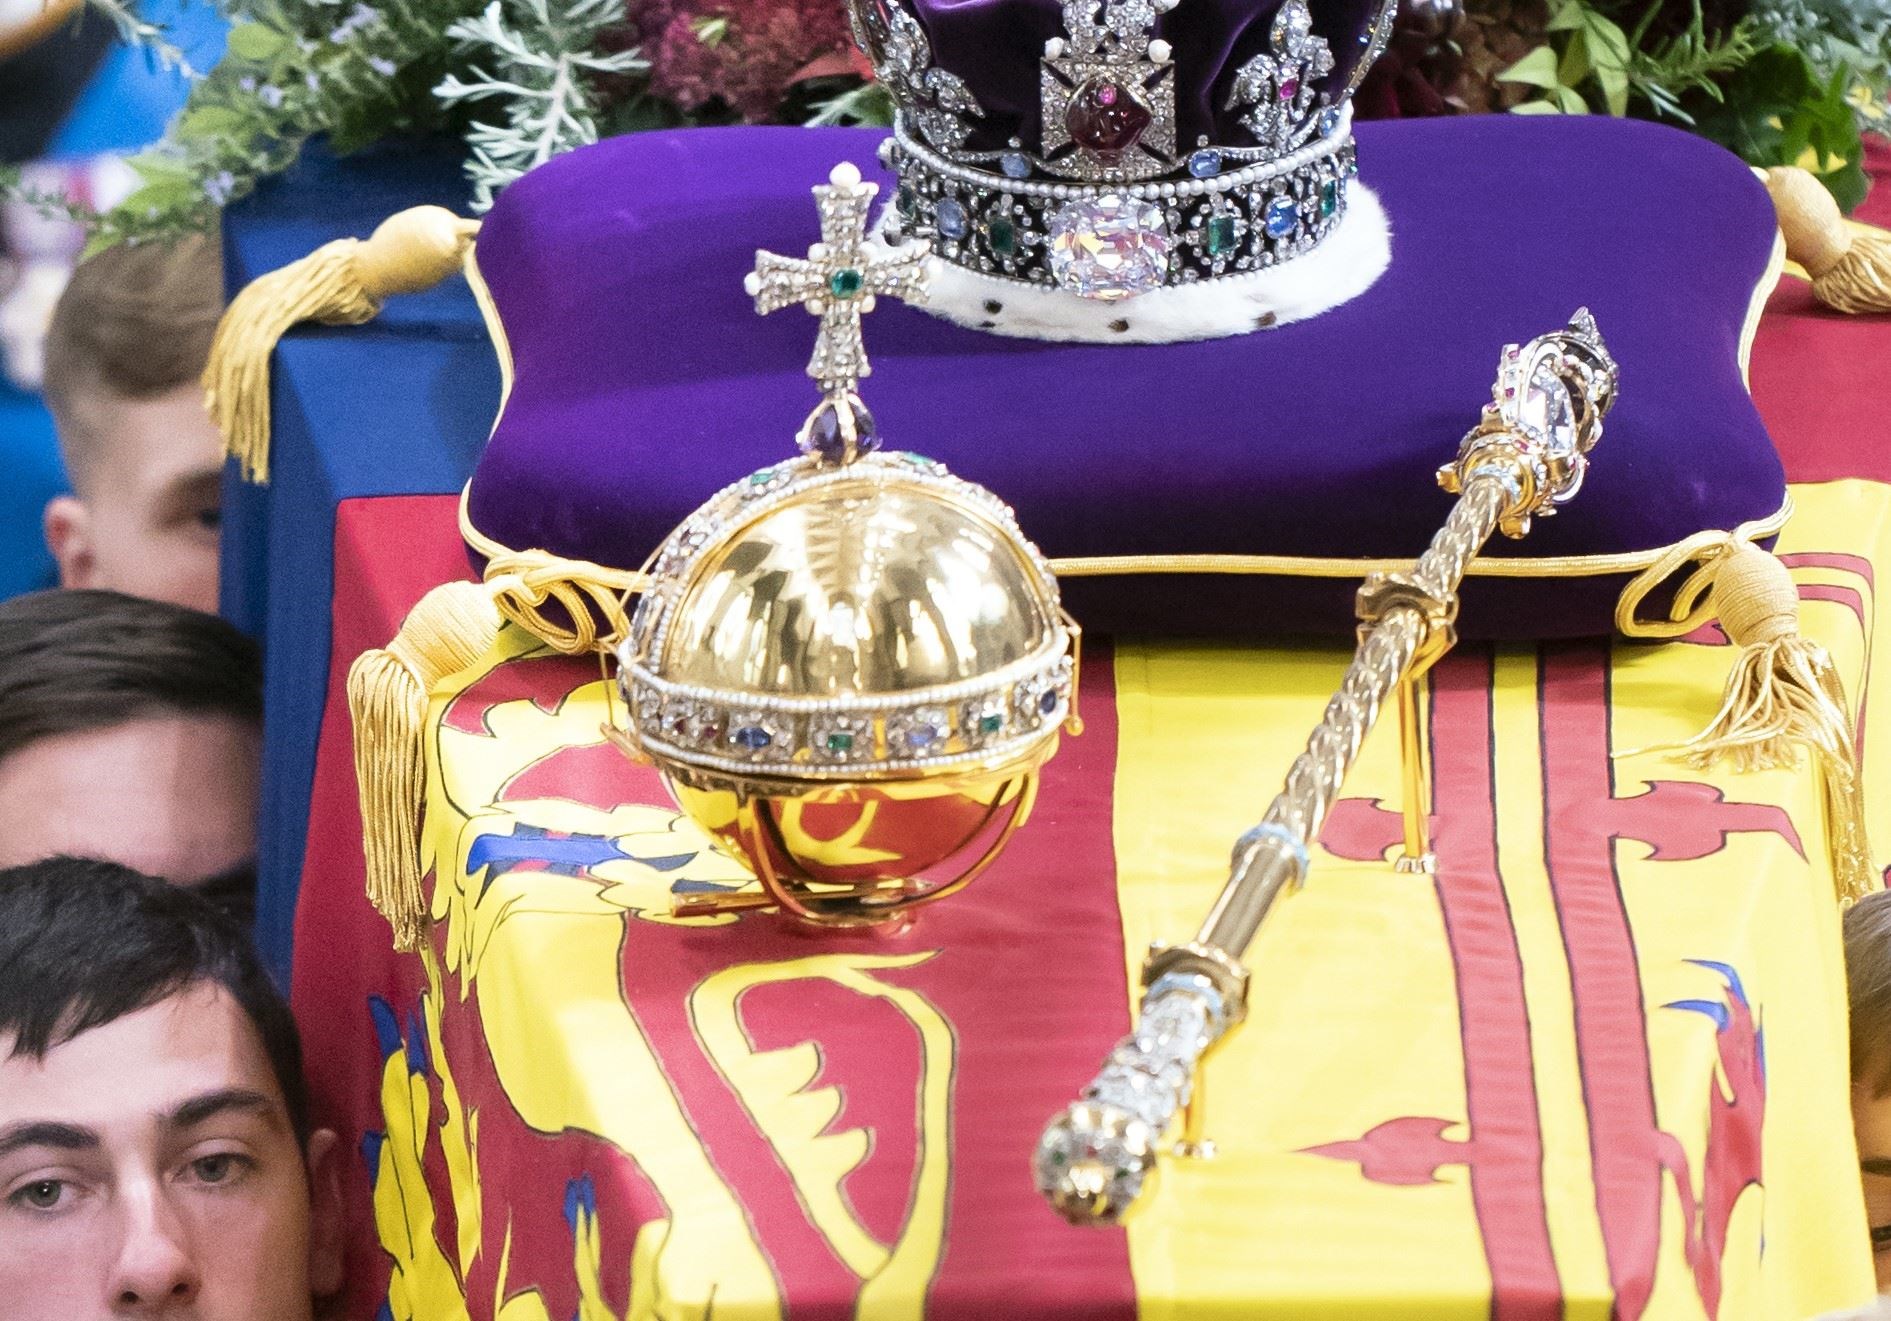 The Sovereign’s Orb with the Sovereign’s Sceptre with Cross and Imperial State Crown on Elizabeth II’s coffin (PA)